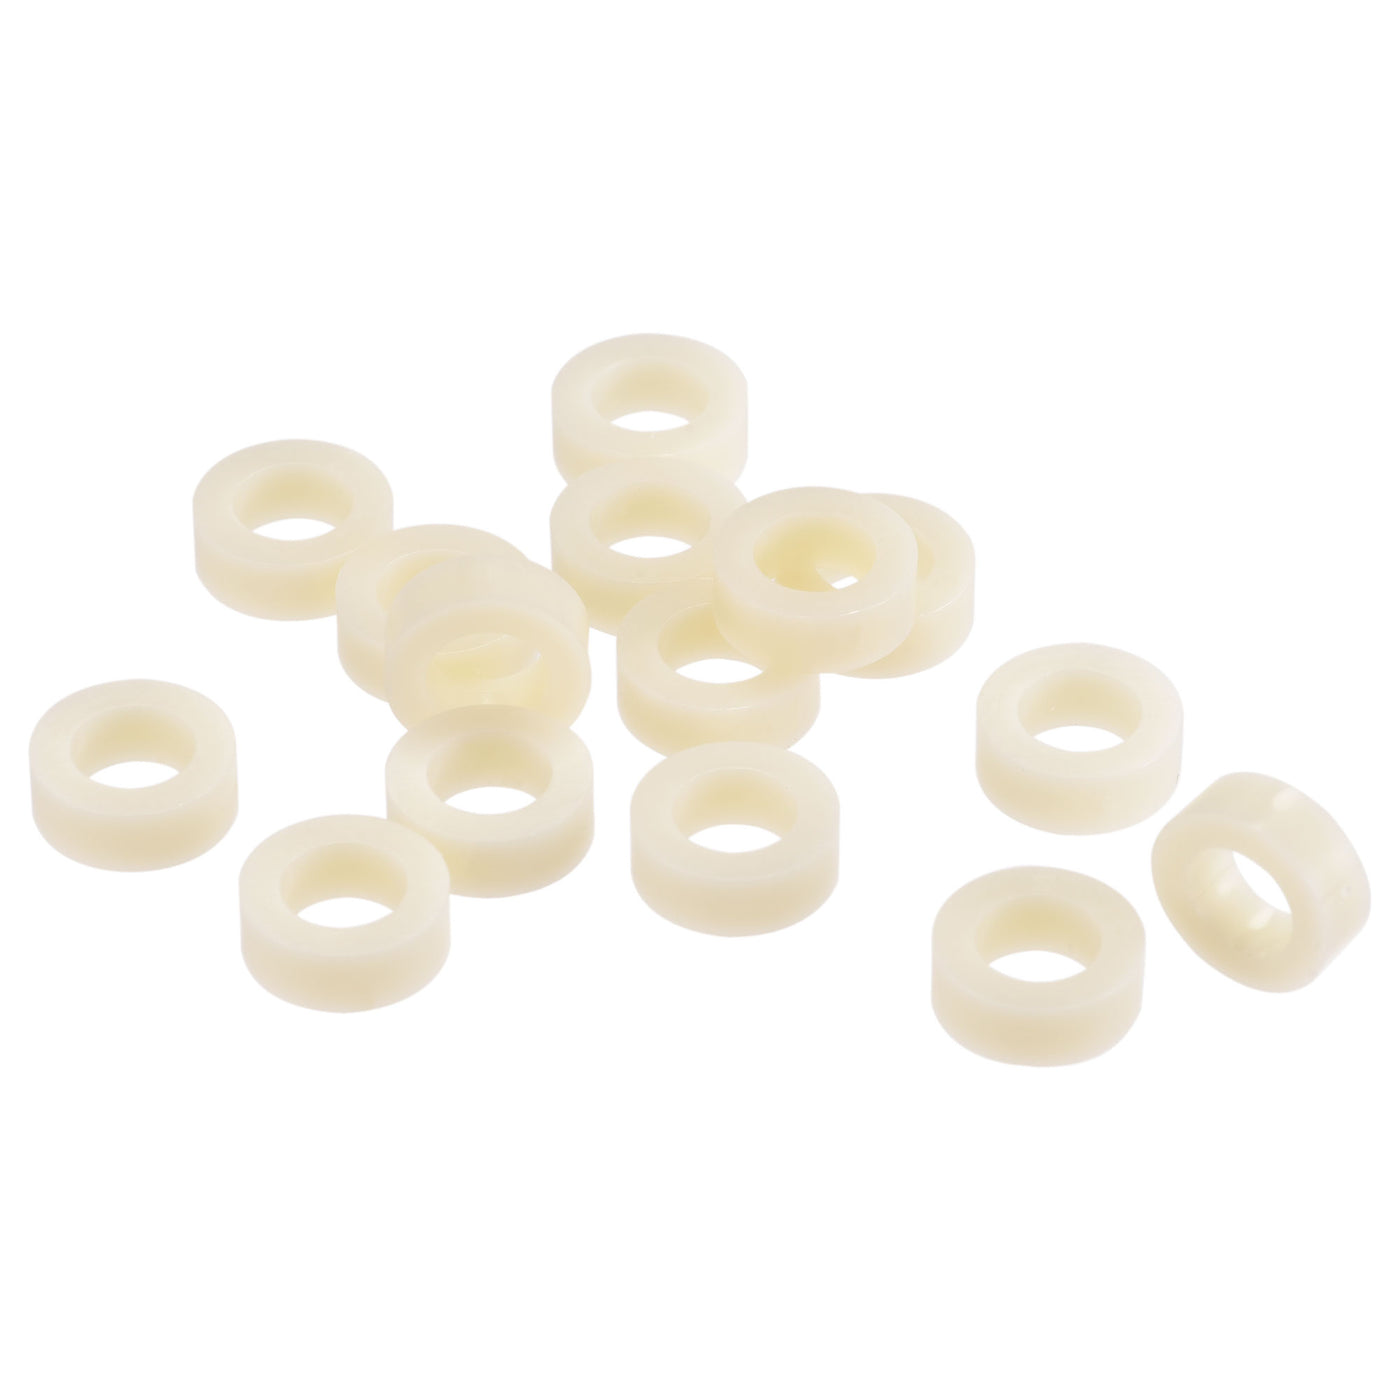 Uxcell Uxcell ABS Round Spacer Washer ID 8.2mm OD 14mm L 8mm for M8 Screws, Beige, 300Pcs